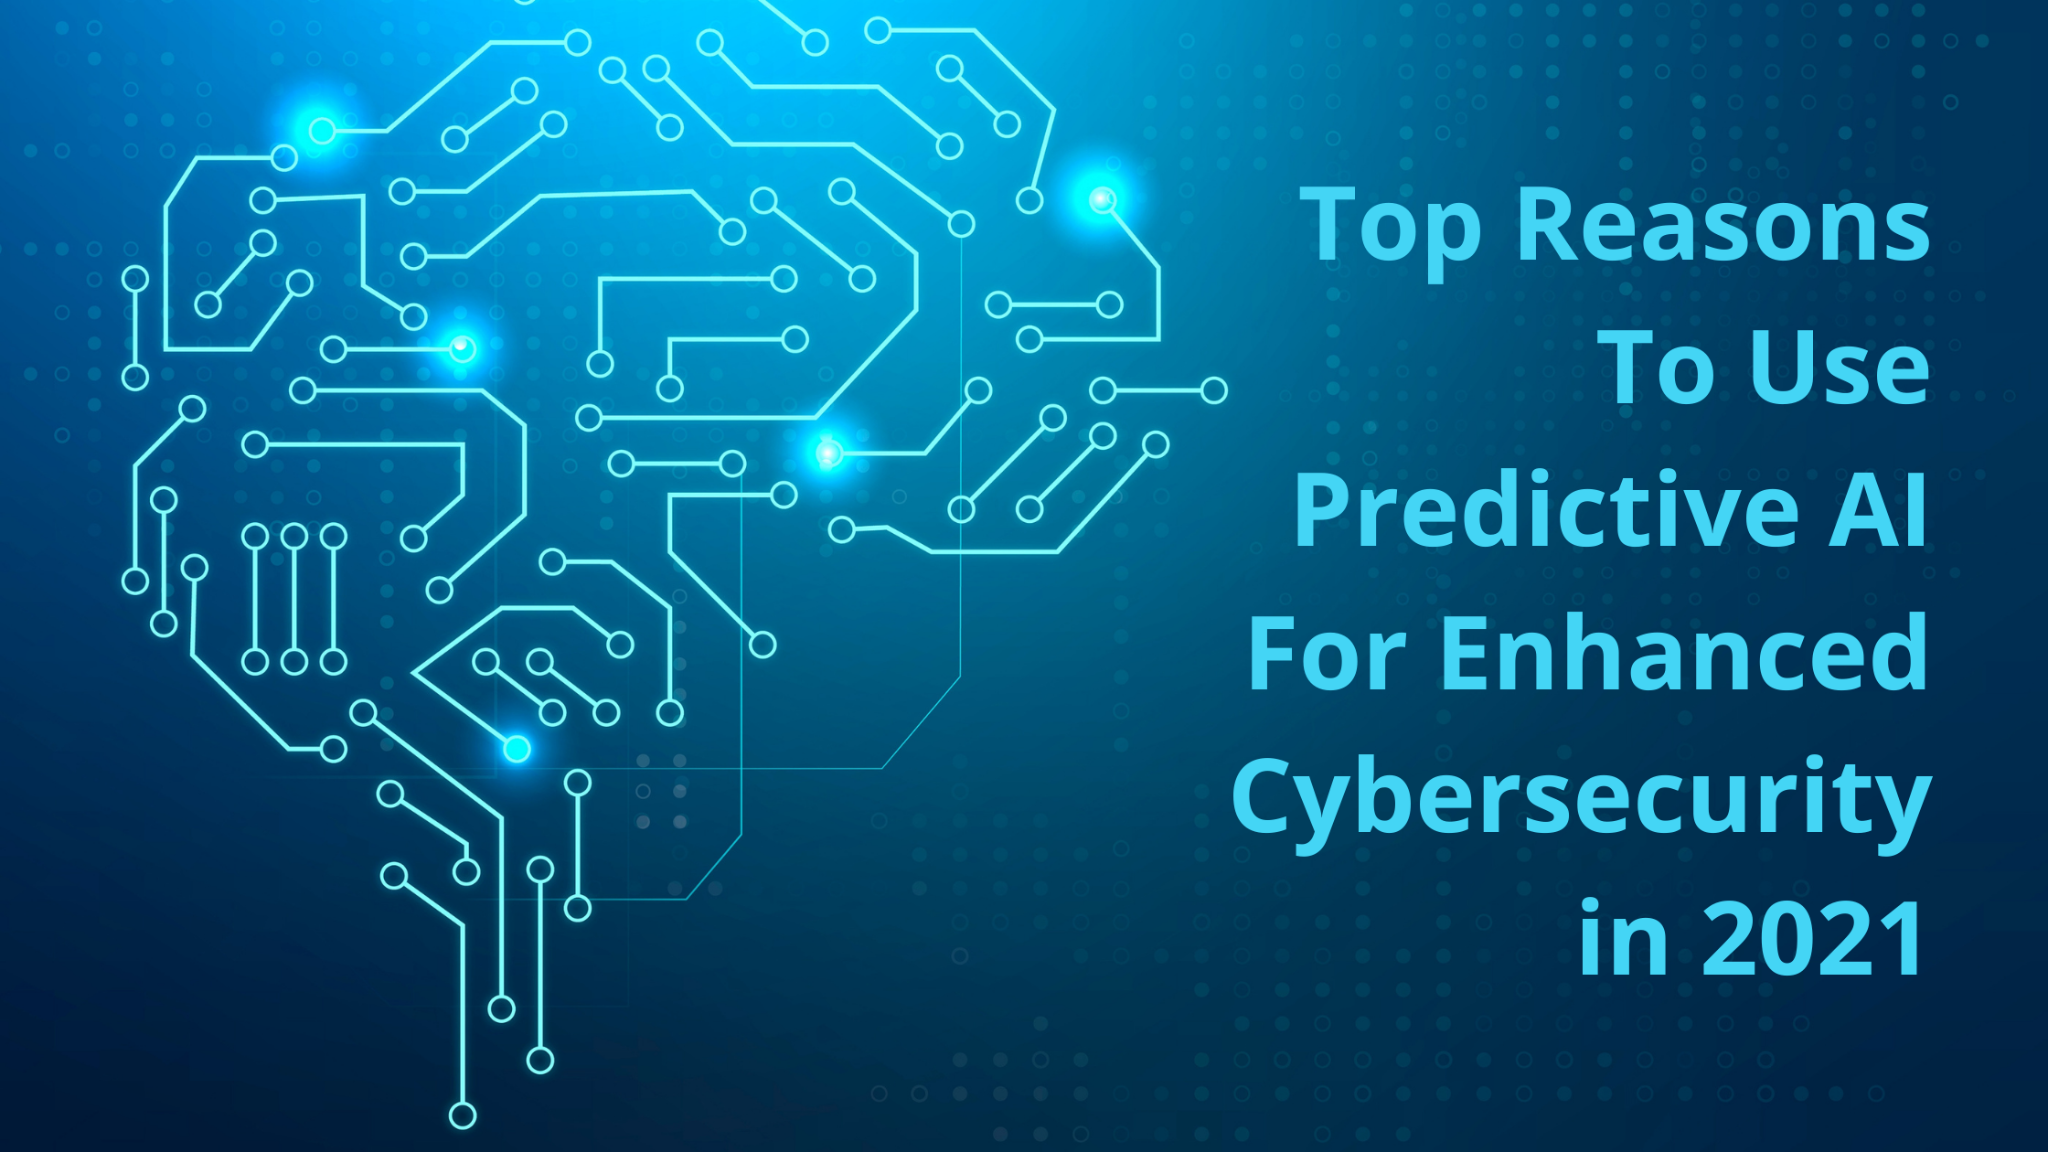 Top Reasons to use Predictive AI for Enhanced Cybersecurity in 2021)